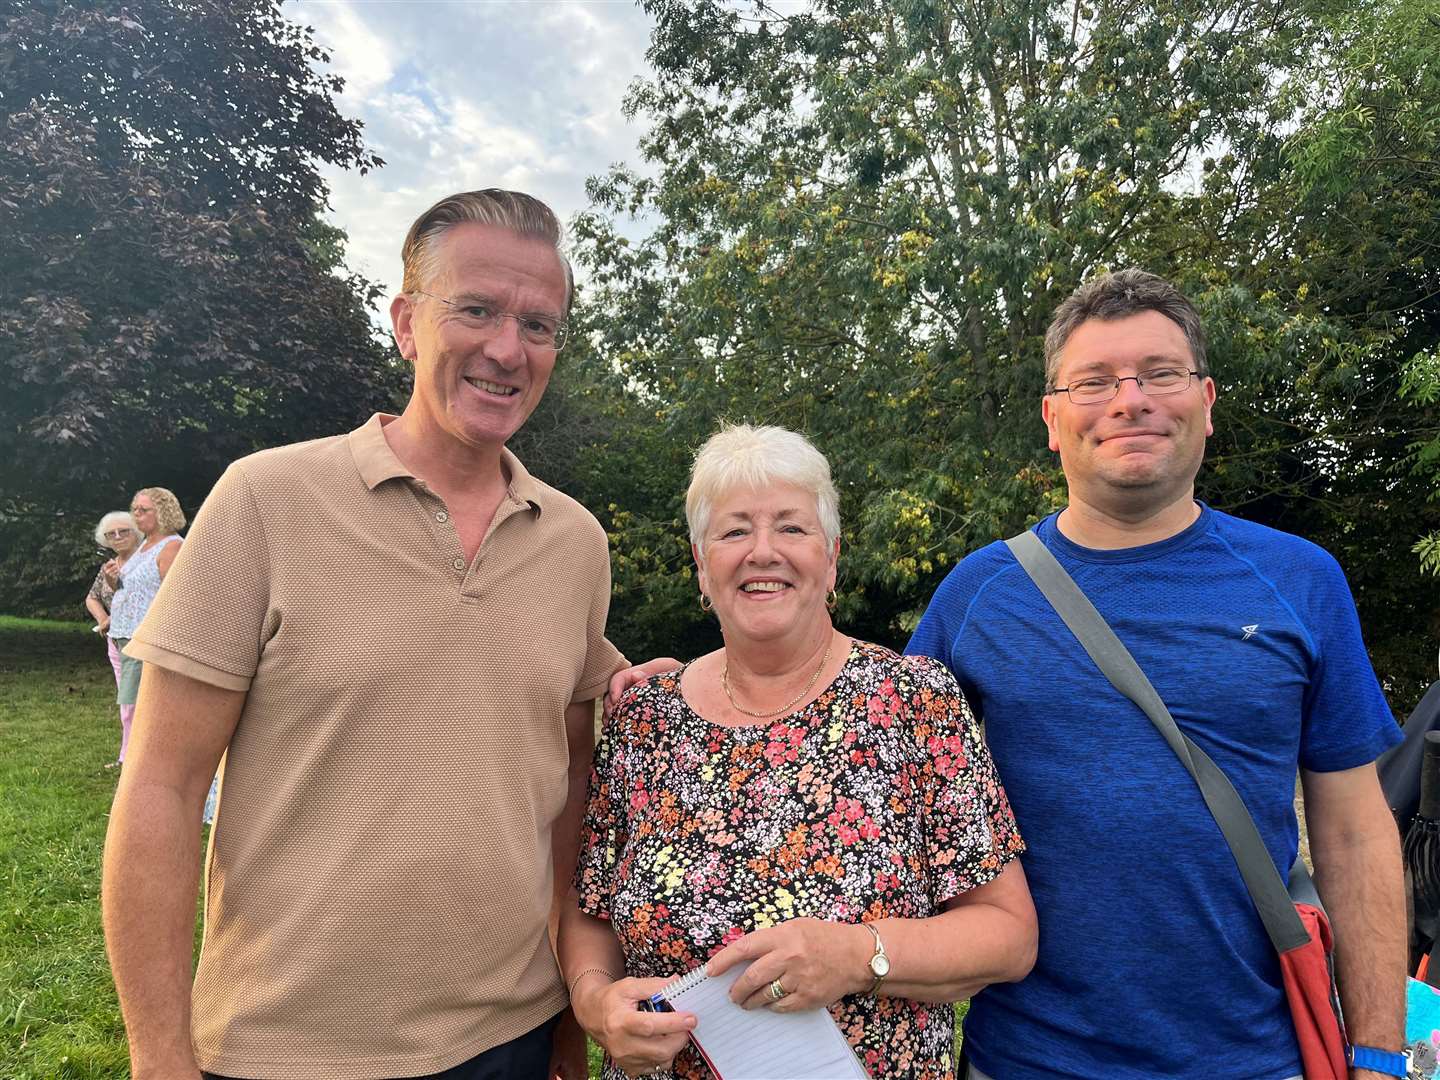 Paul Lansdell (left), Pauline Lowman and Thierry Maillard distributed leaflets about the village green application in a bid to get residents' support